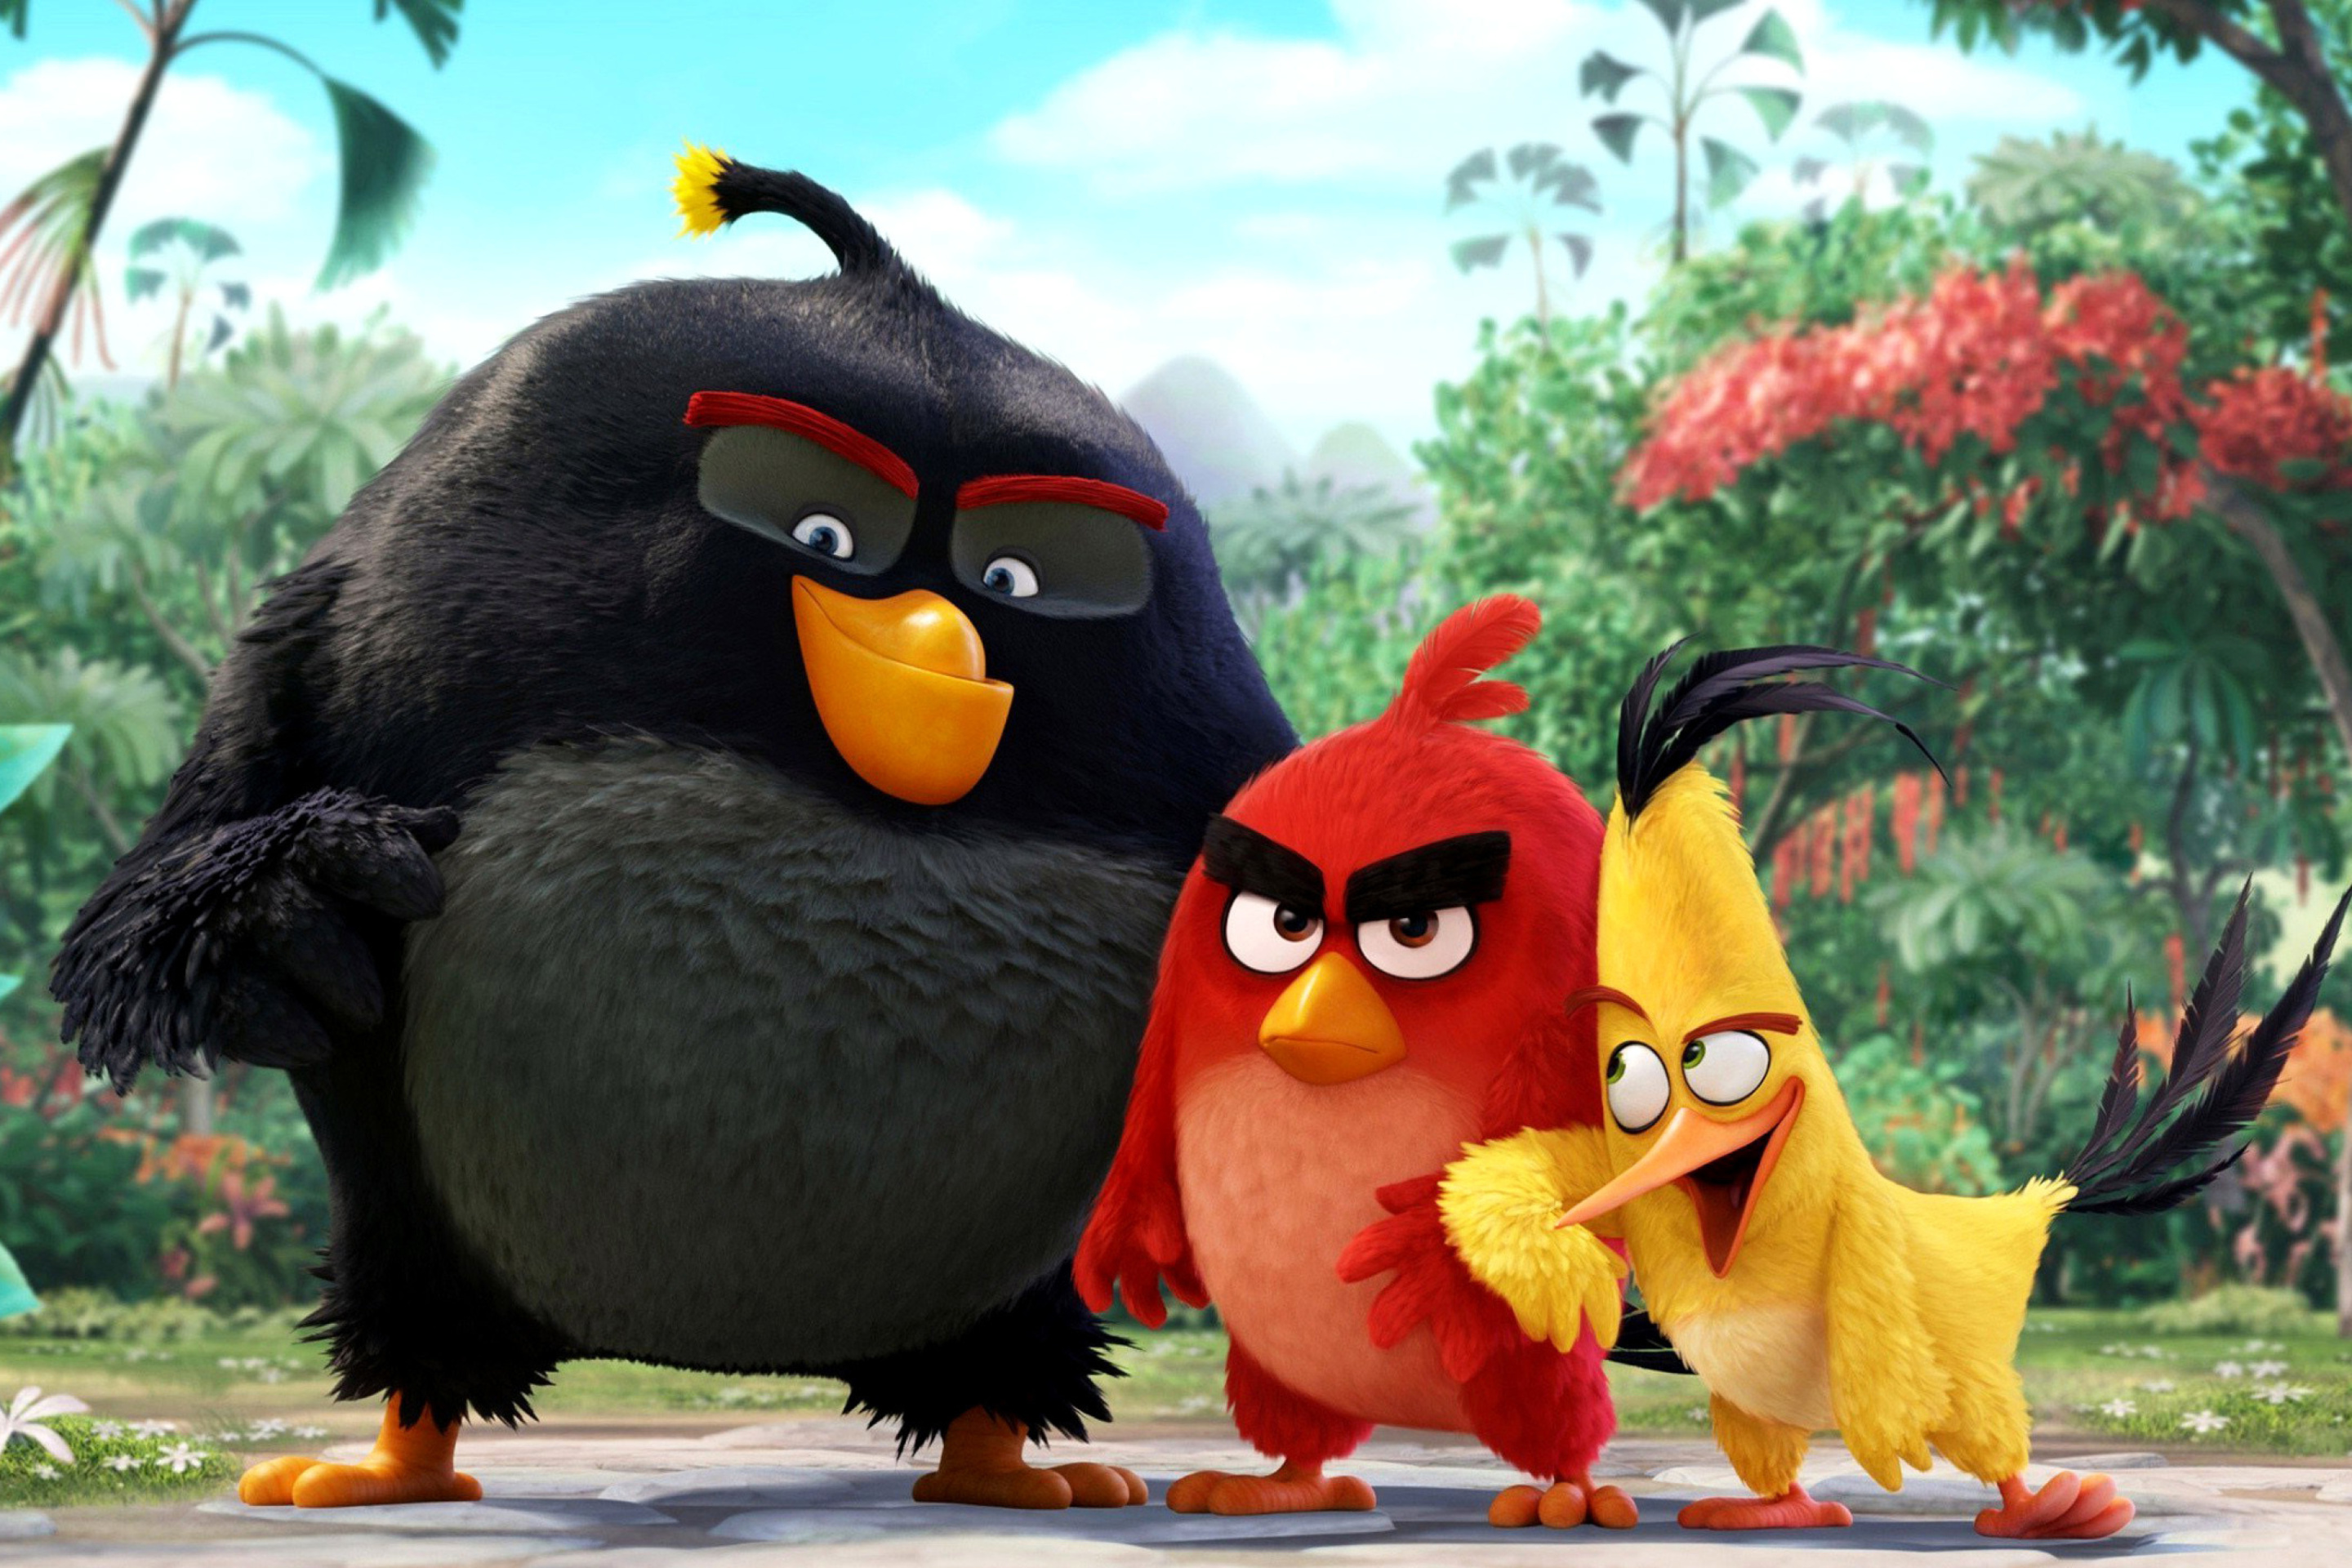 The Angry Birds Comedy Movie 2016 wallpaper 2880x1920